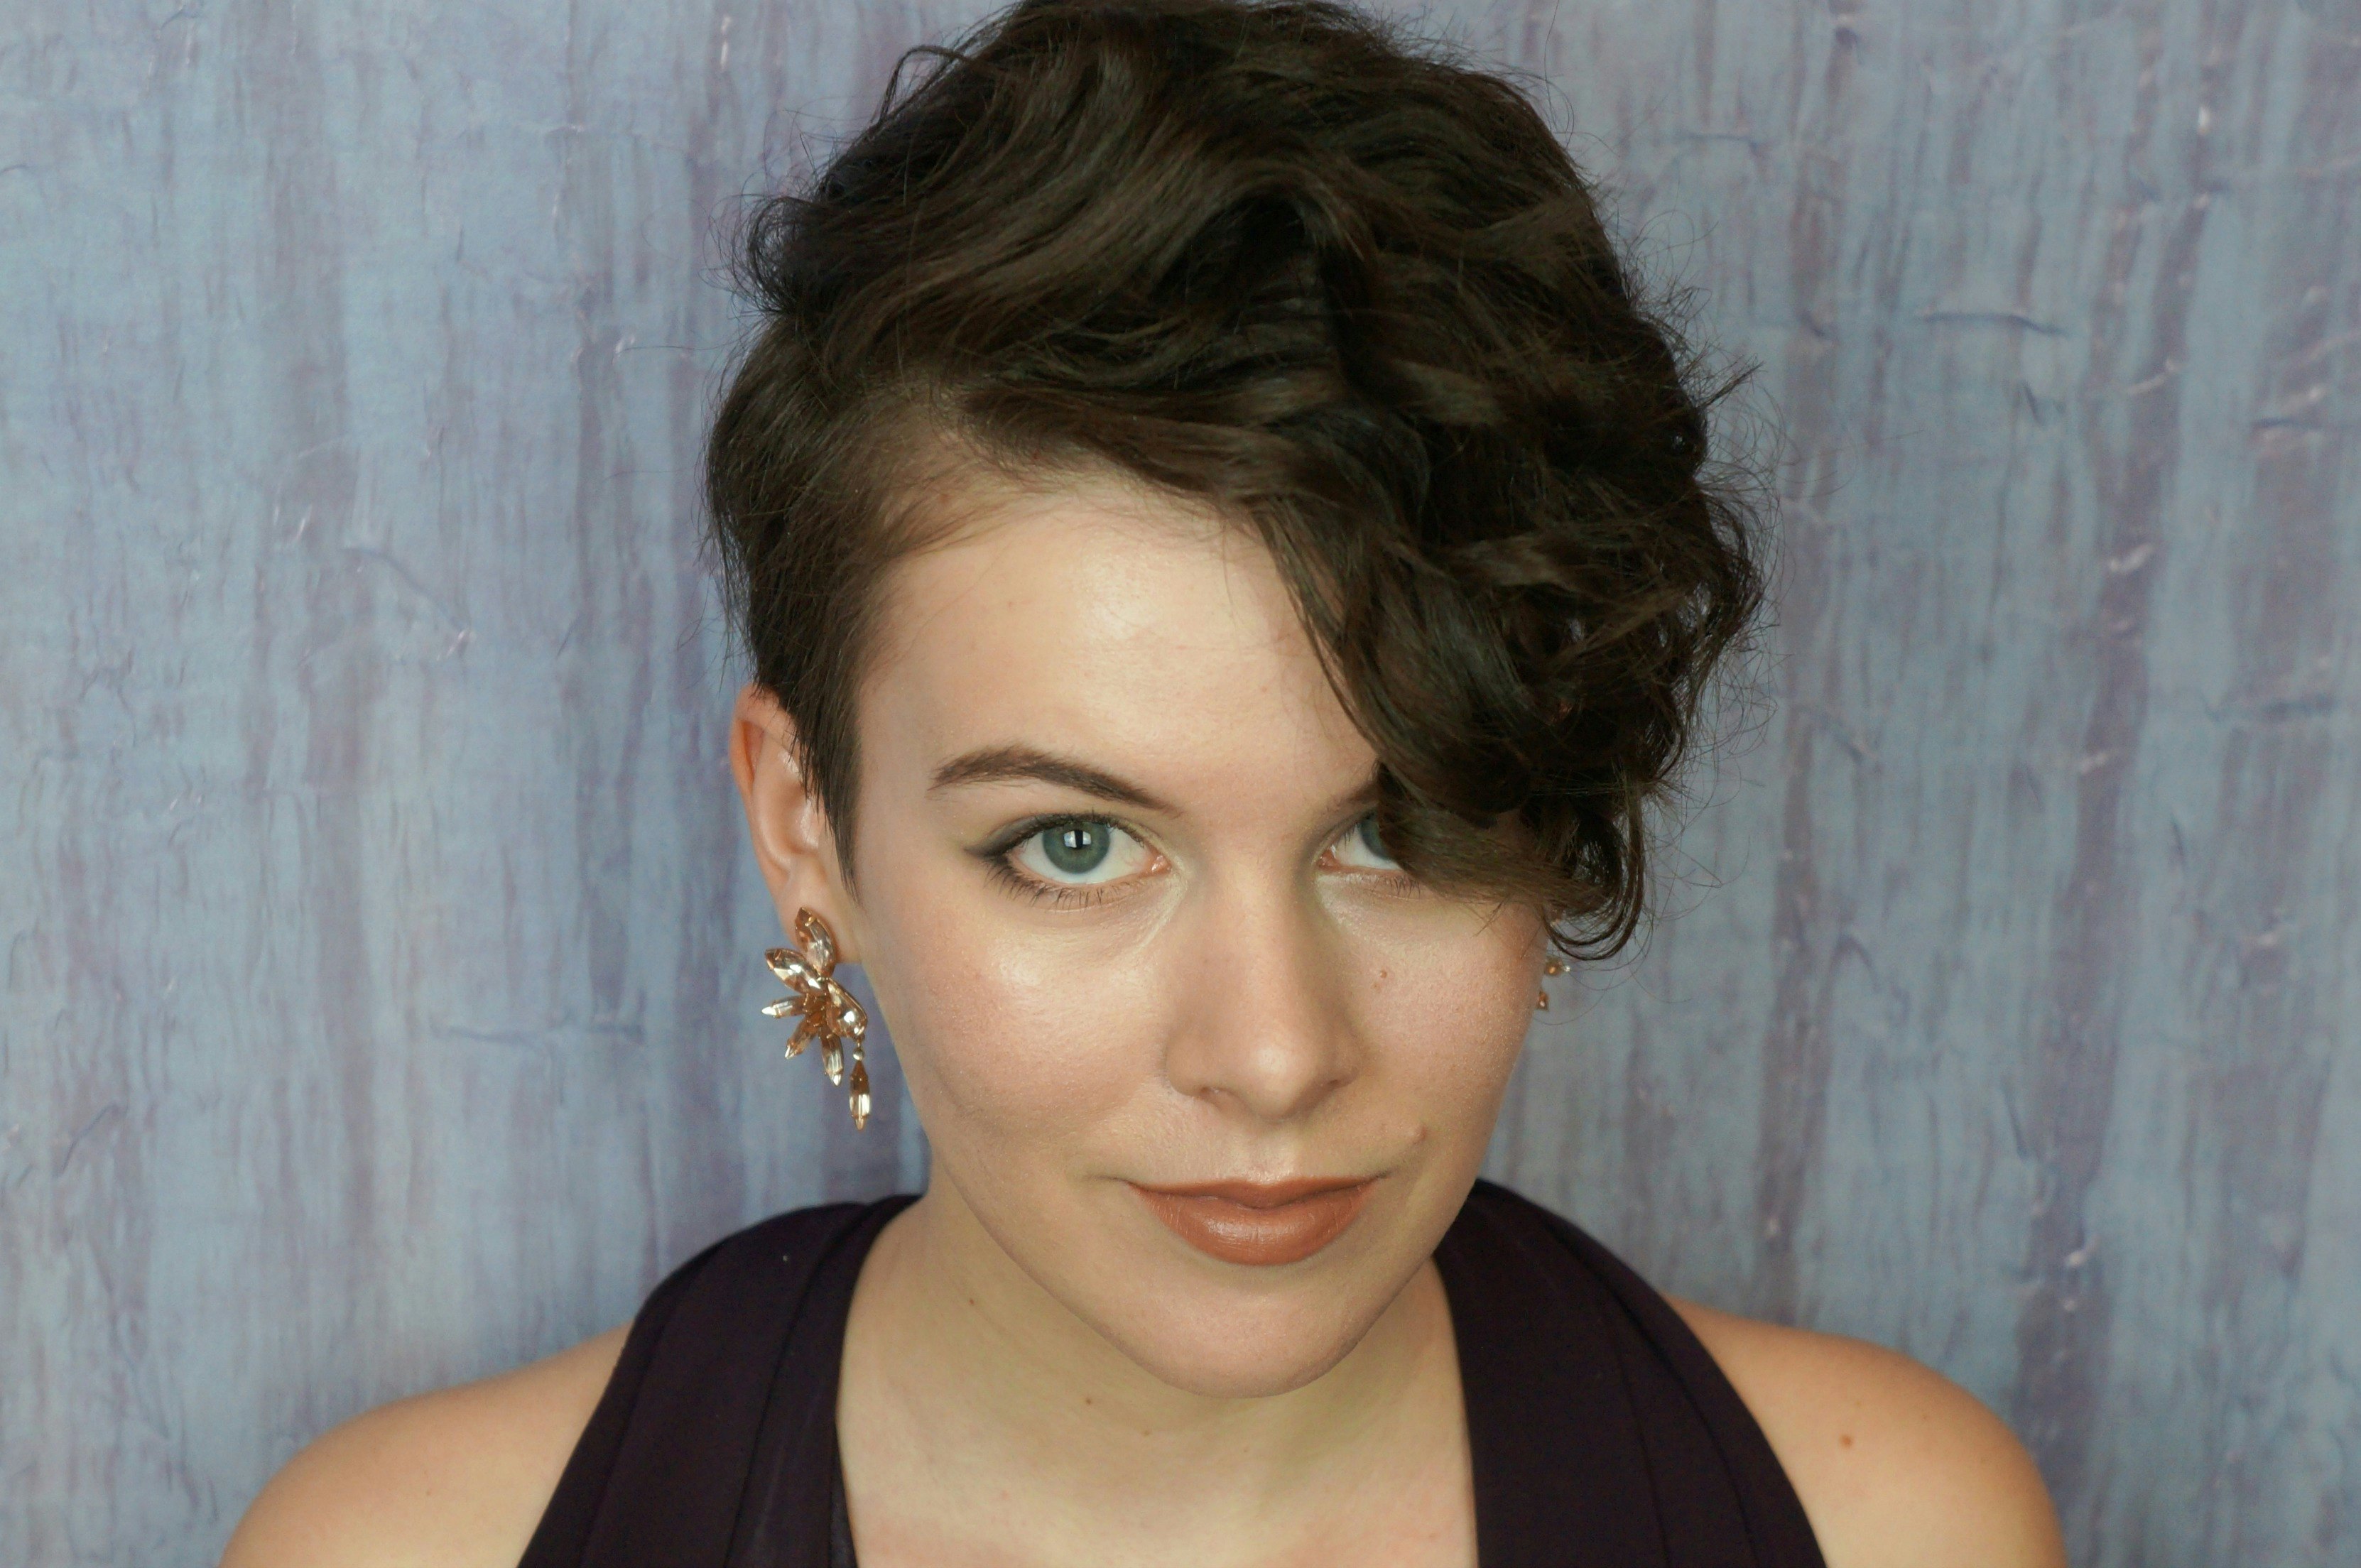 4 Short Hairstyles For Prom That Prove Pixie Cuts Can Be Extremely Glam